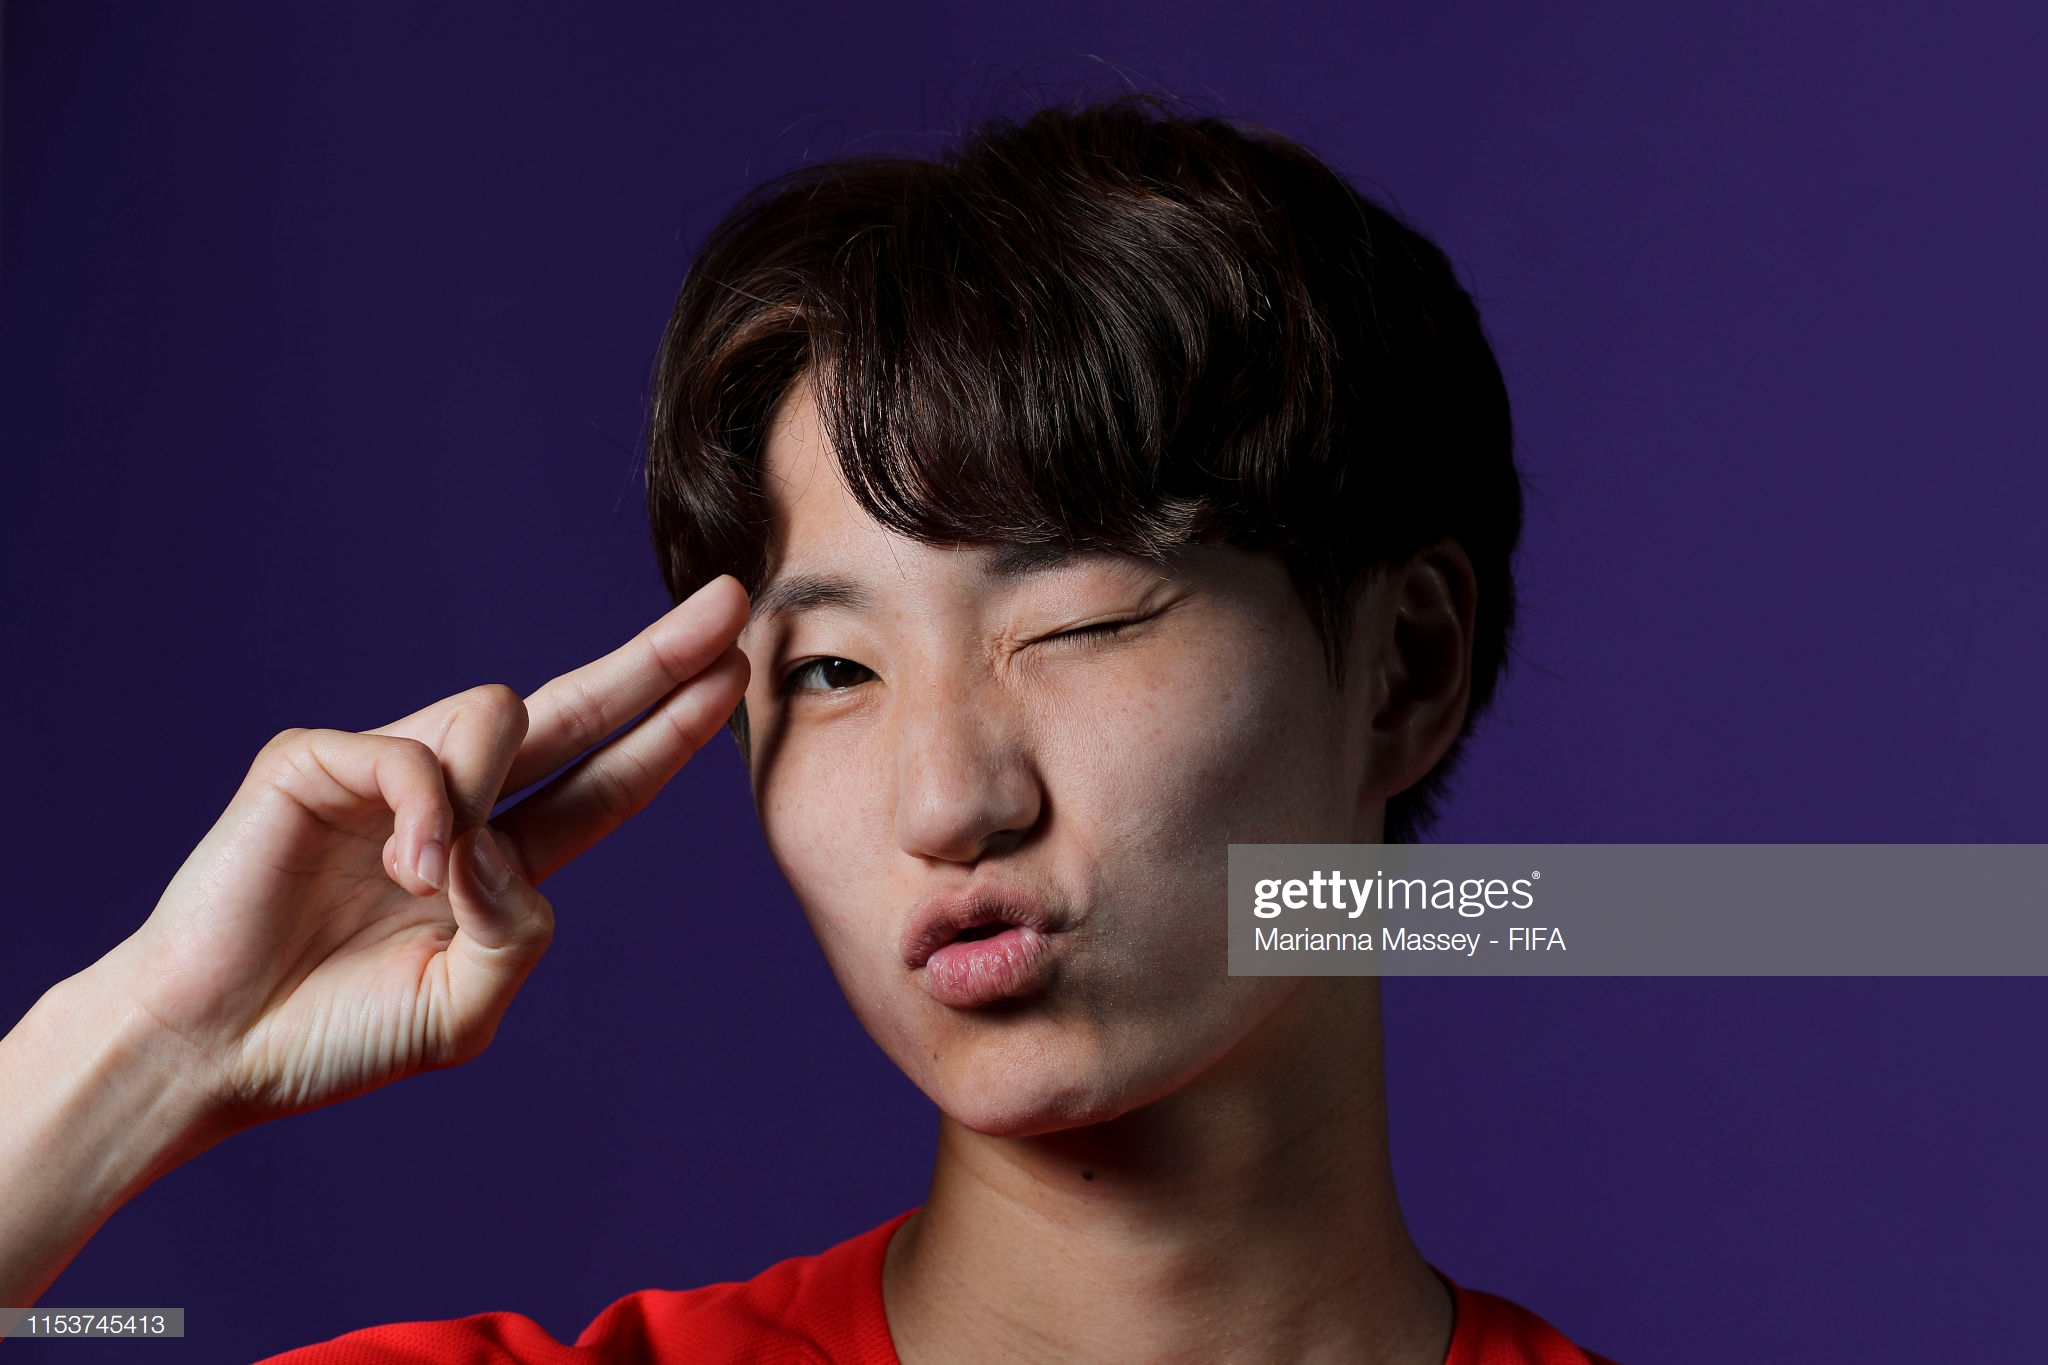 gettyimages-1153745413-2048x2048.jpg